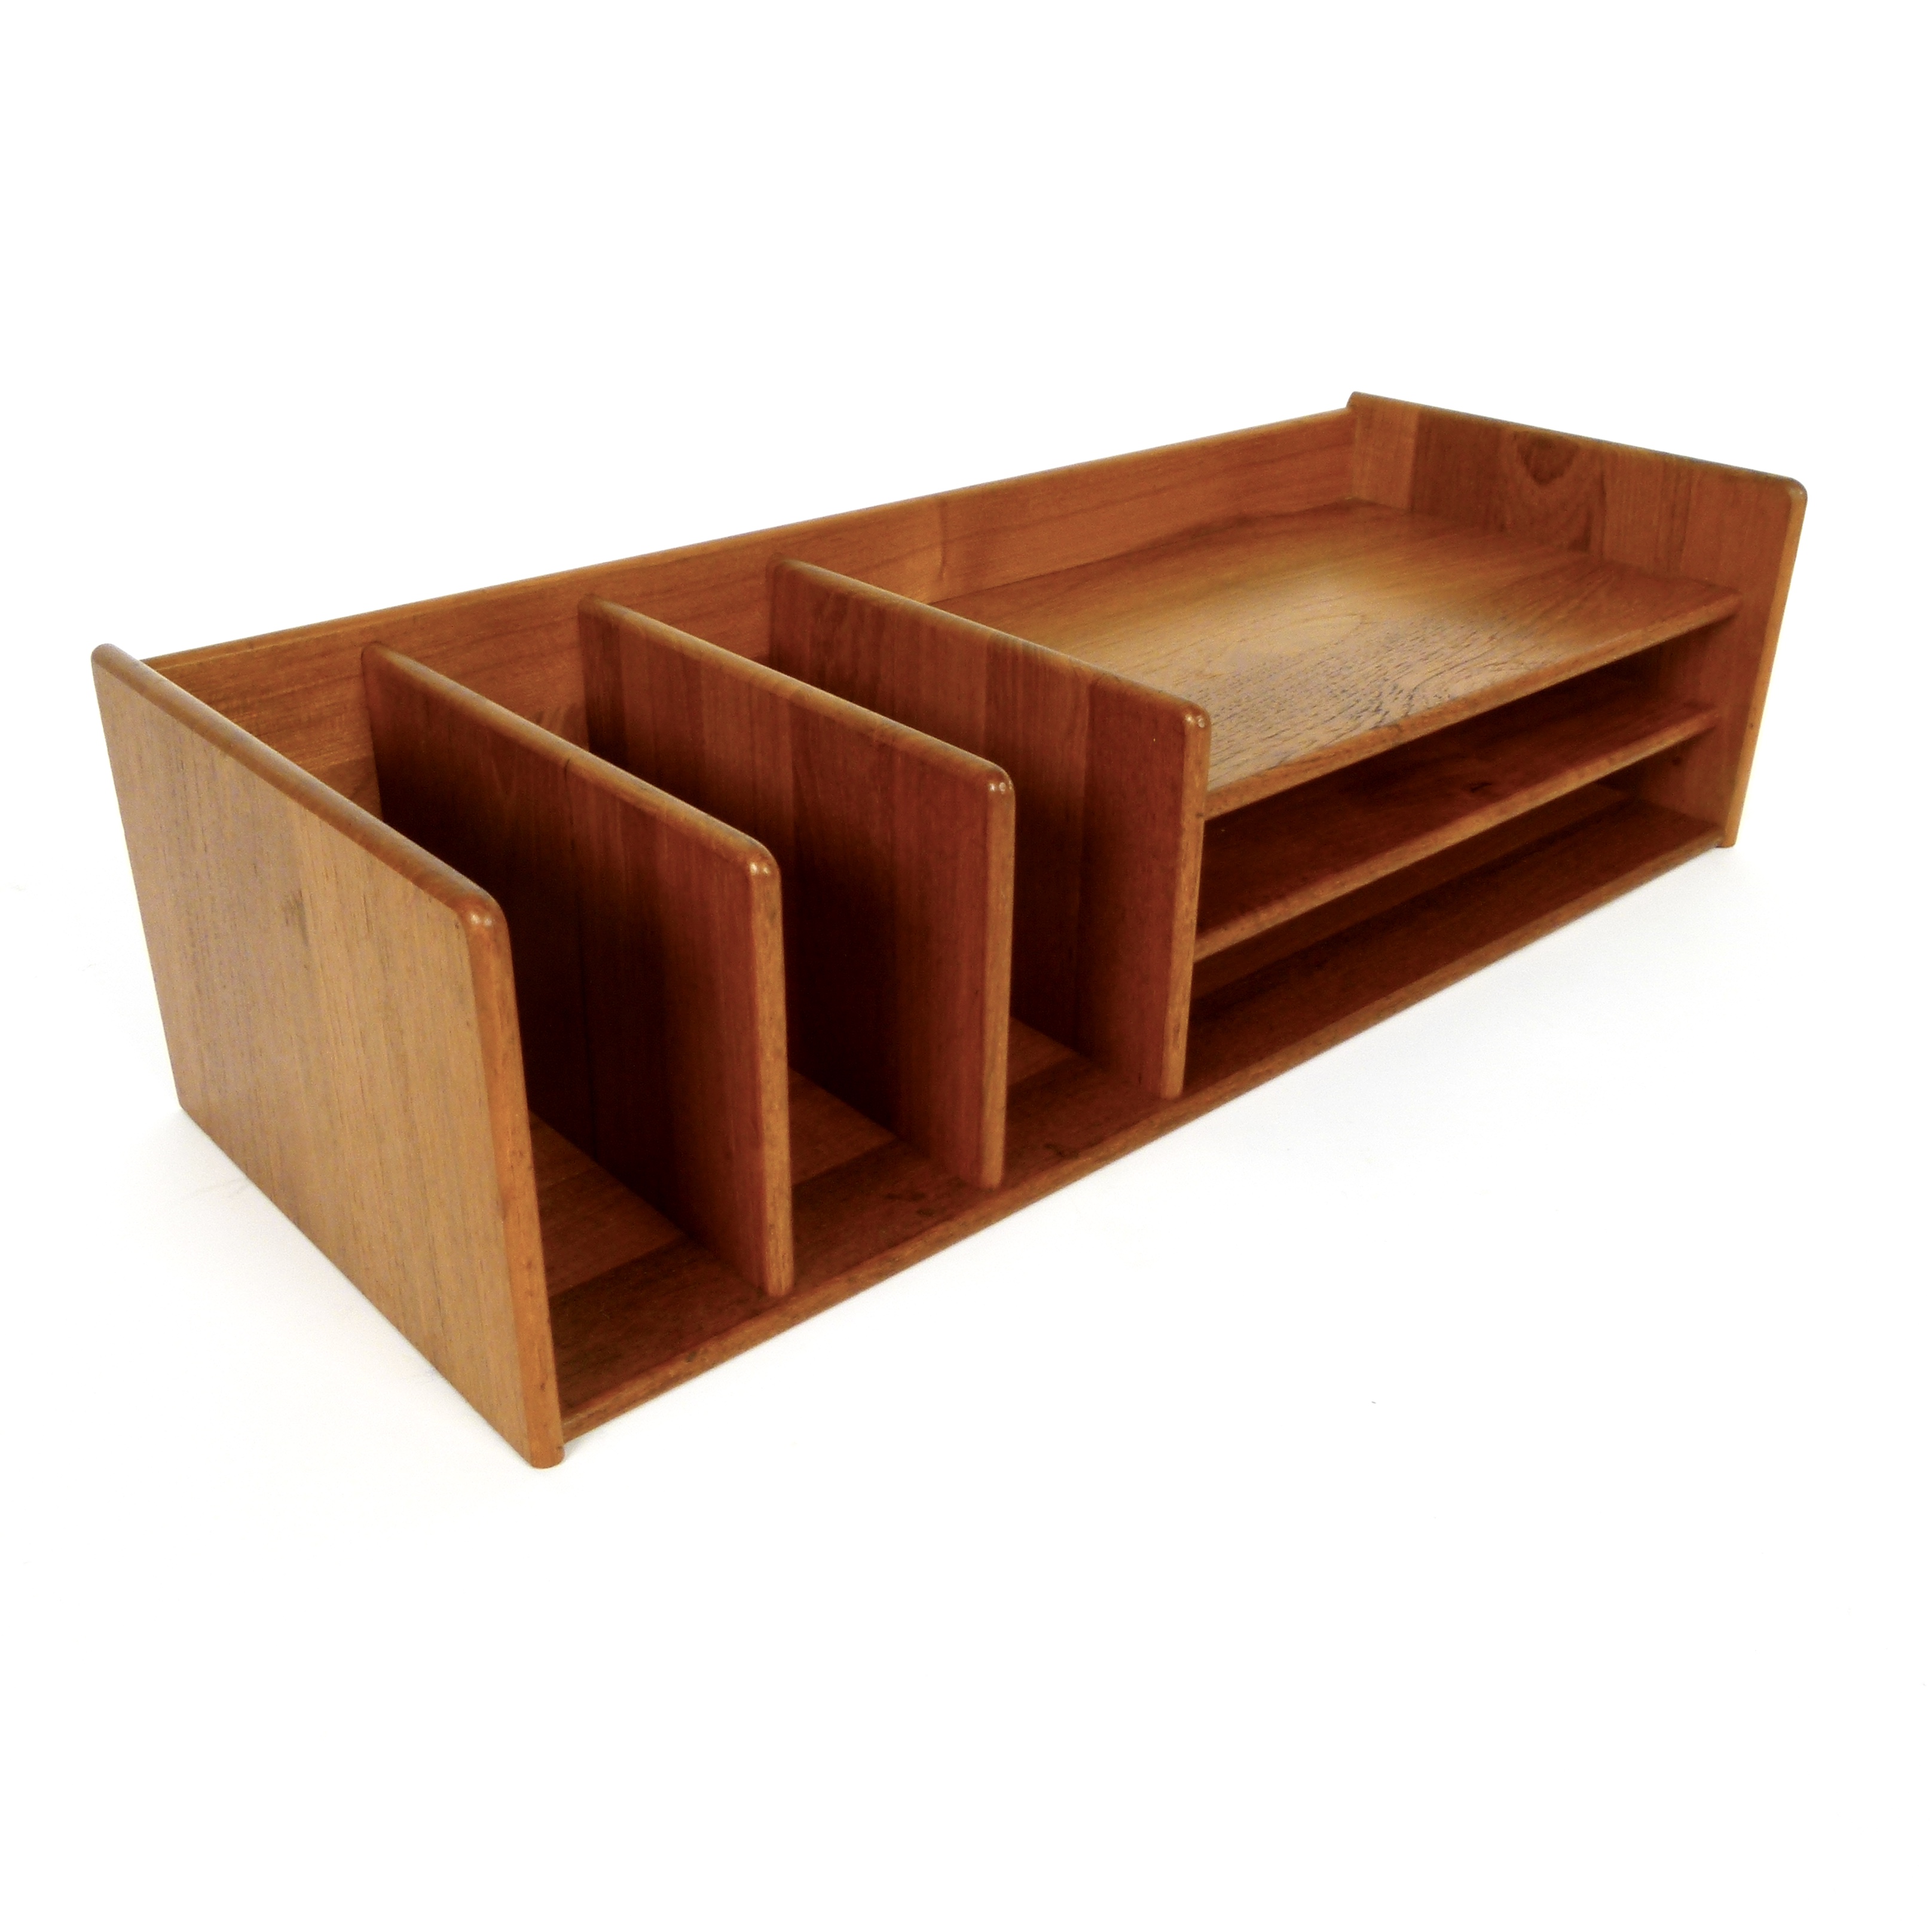 https://cityissue.com/media/pages/shop/objects-and-rugs/teak-desk-organizer/5857f87d32-1623011908/large-teak-letter-tray.jpg